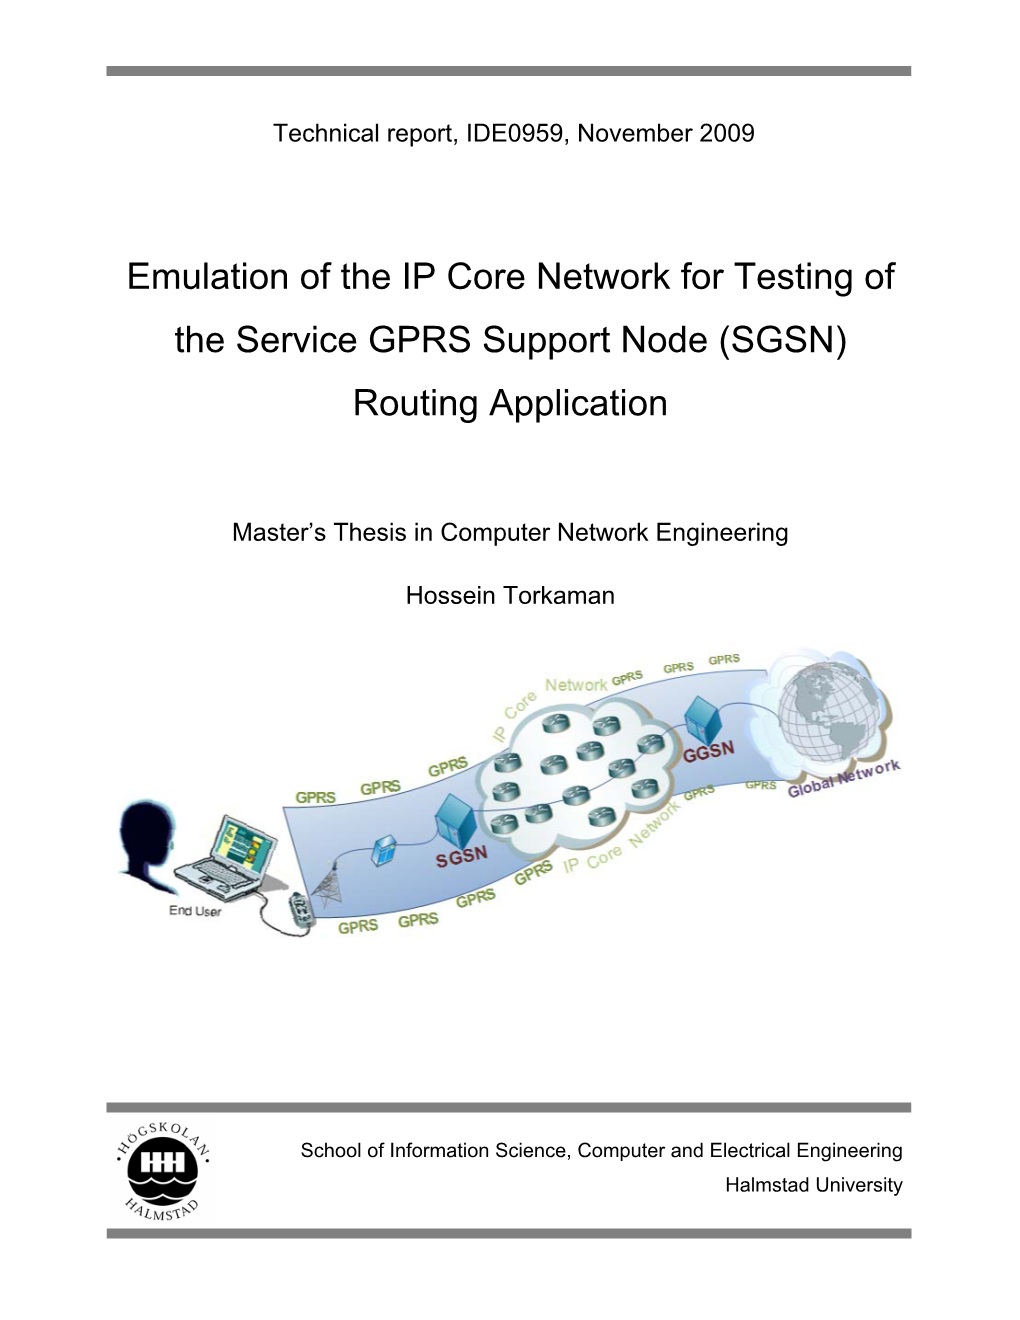 Emulation of the IP Core Network for Testing of the Service GPRS Support Node (SGSN) Routing Application